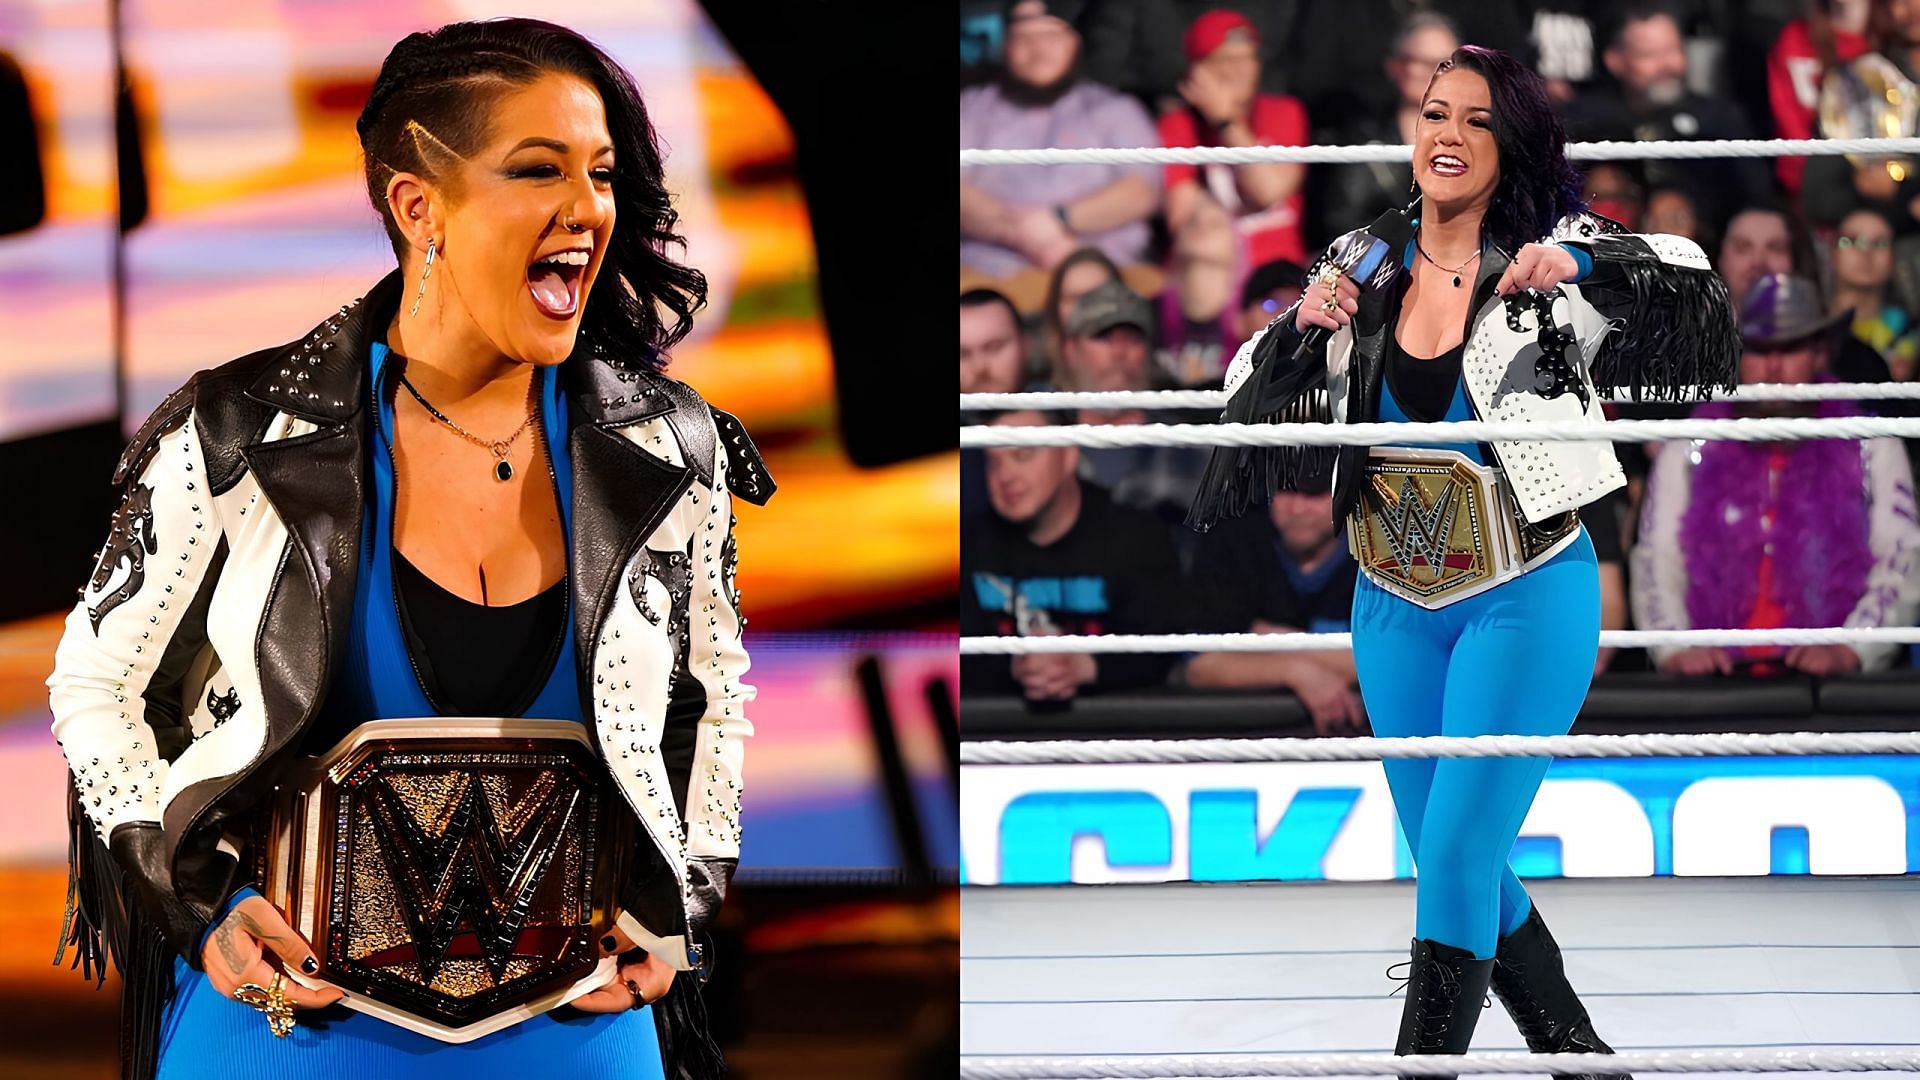 Bayley is the new WWE Women